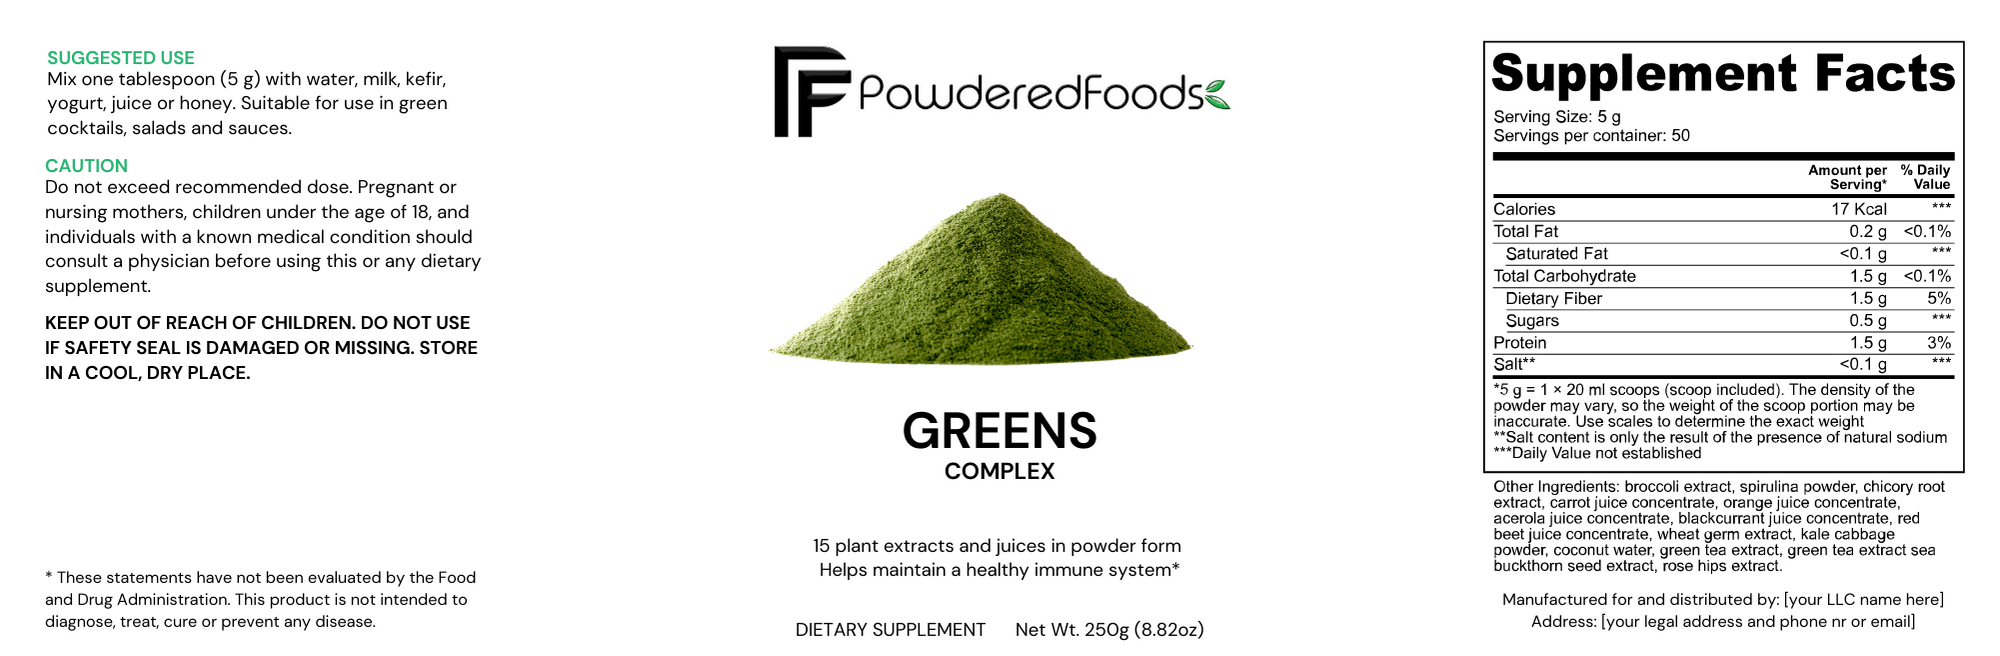 Powdered Greens complex 2 Pack